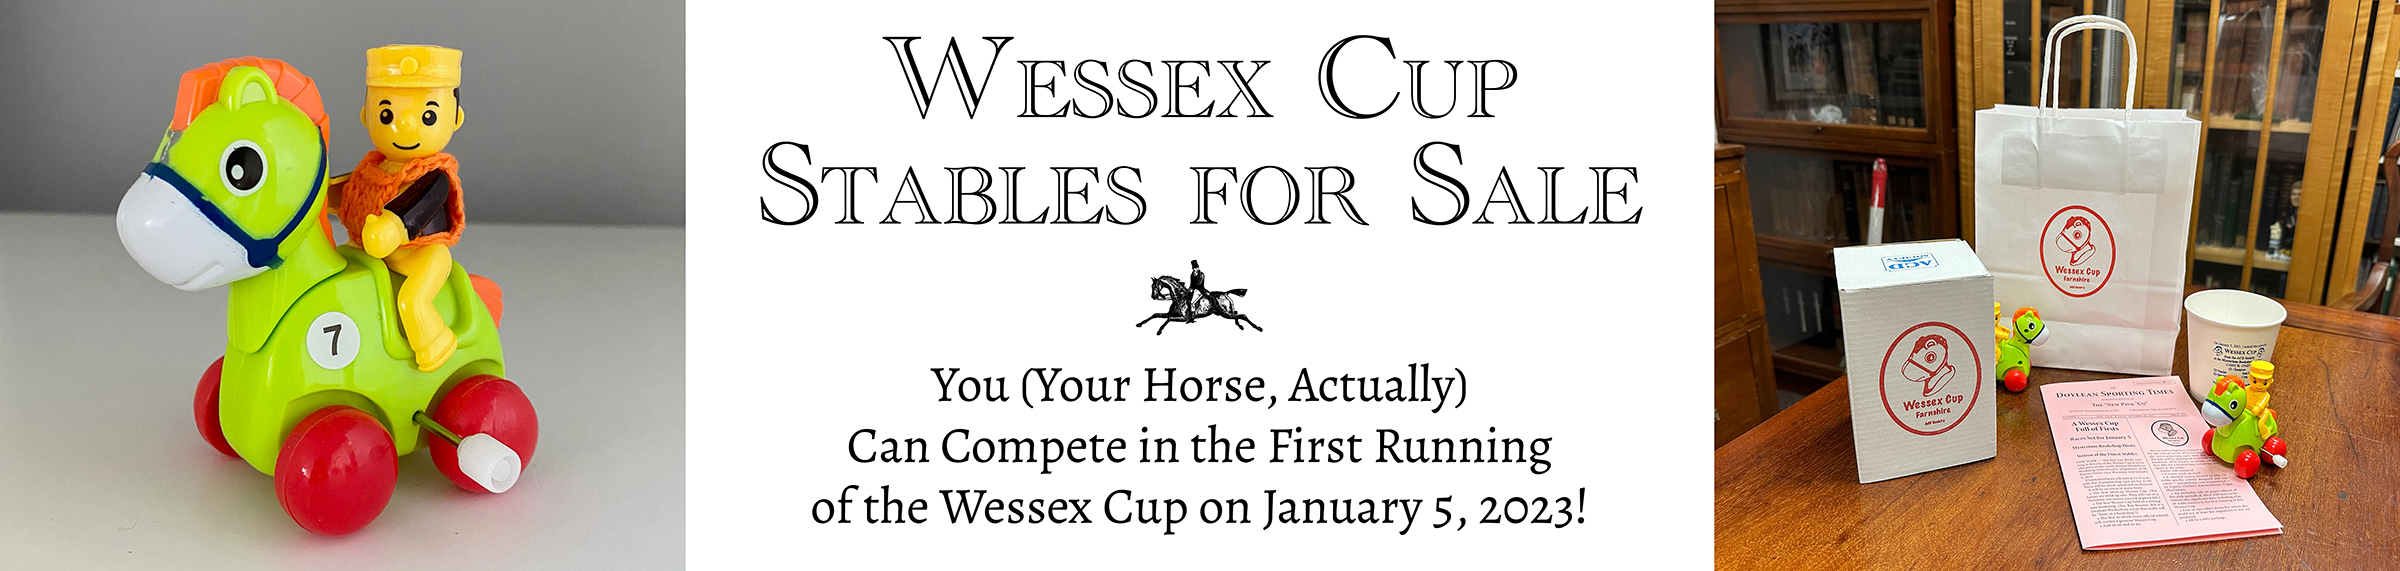 a wind-up toy horse, and a display of wessex cup stables, including 2 toy horses, a cup, a bag, a box, and a brochure